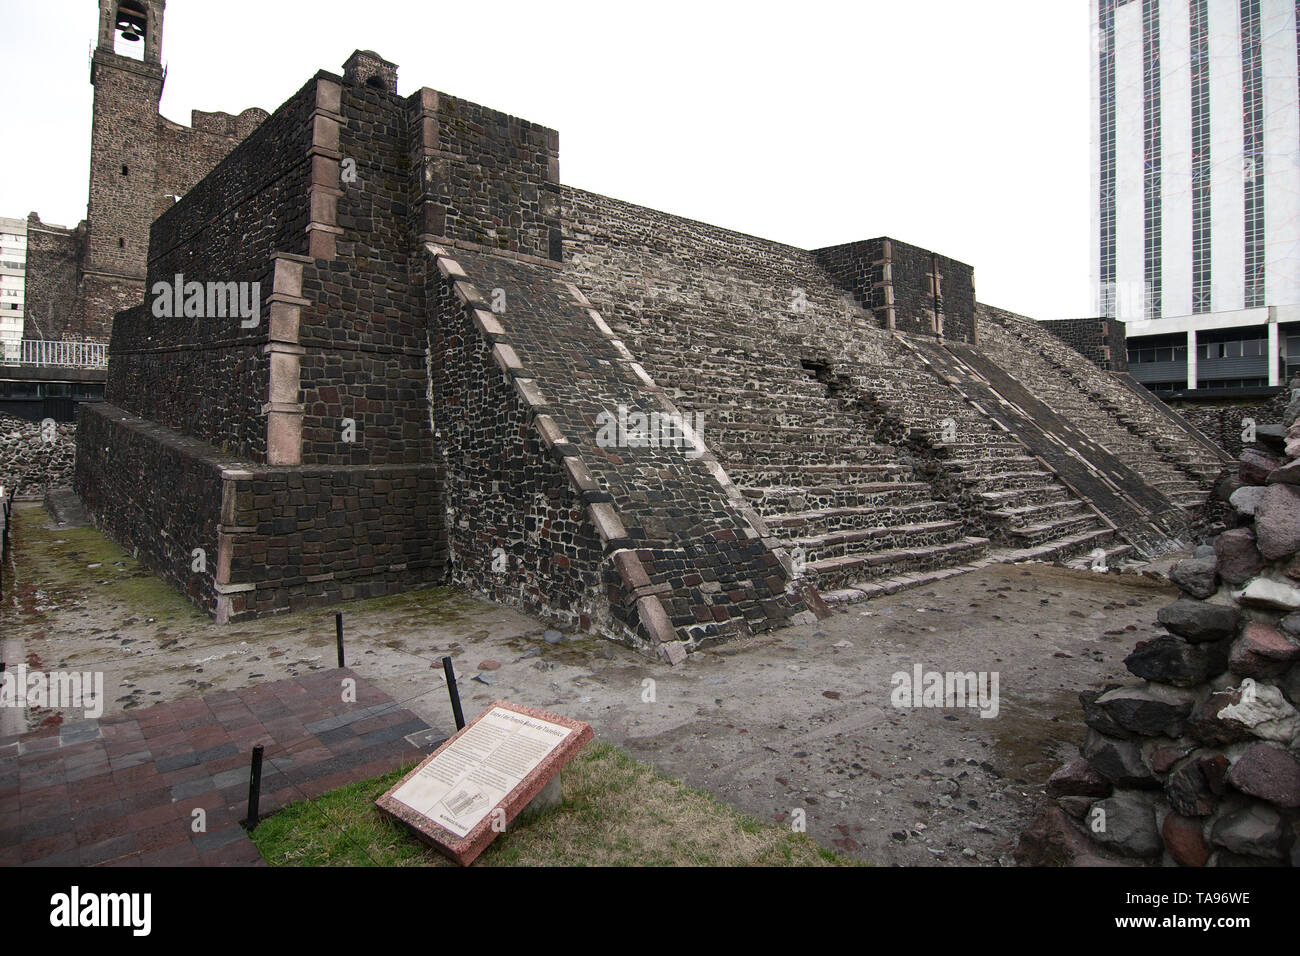 Mexico City, Mexico - 2019: Remains of Aztec temples at the Plaza de las Tres Culturas (Square of the Three Cultures). Stock Photo